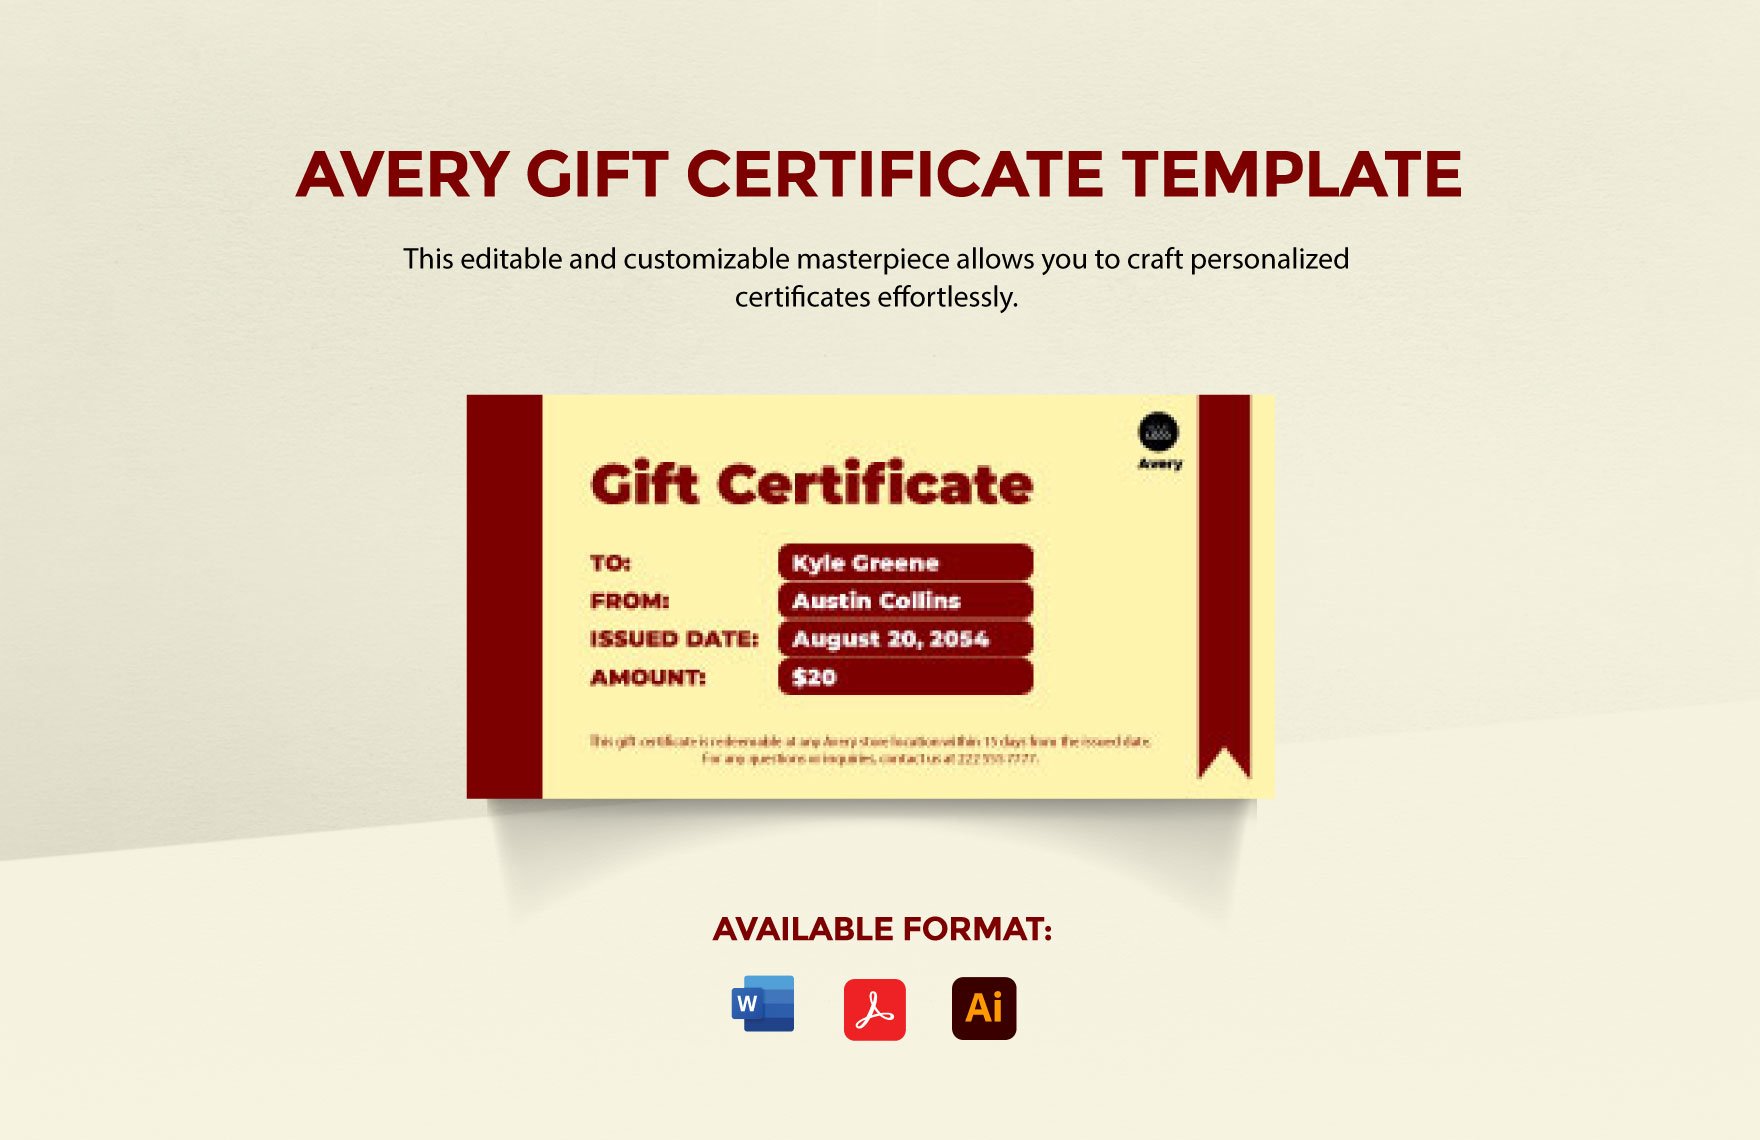 Avery Gift Certificate Template